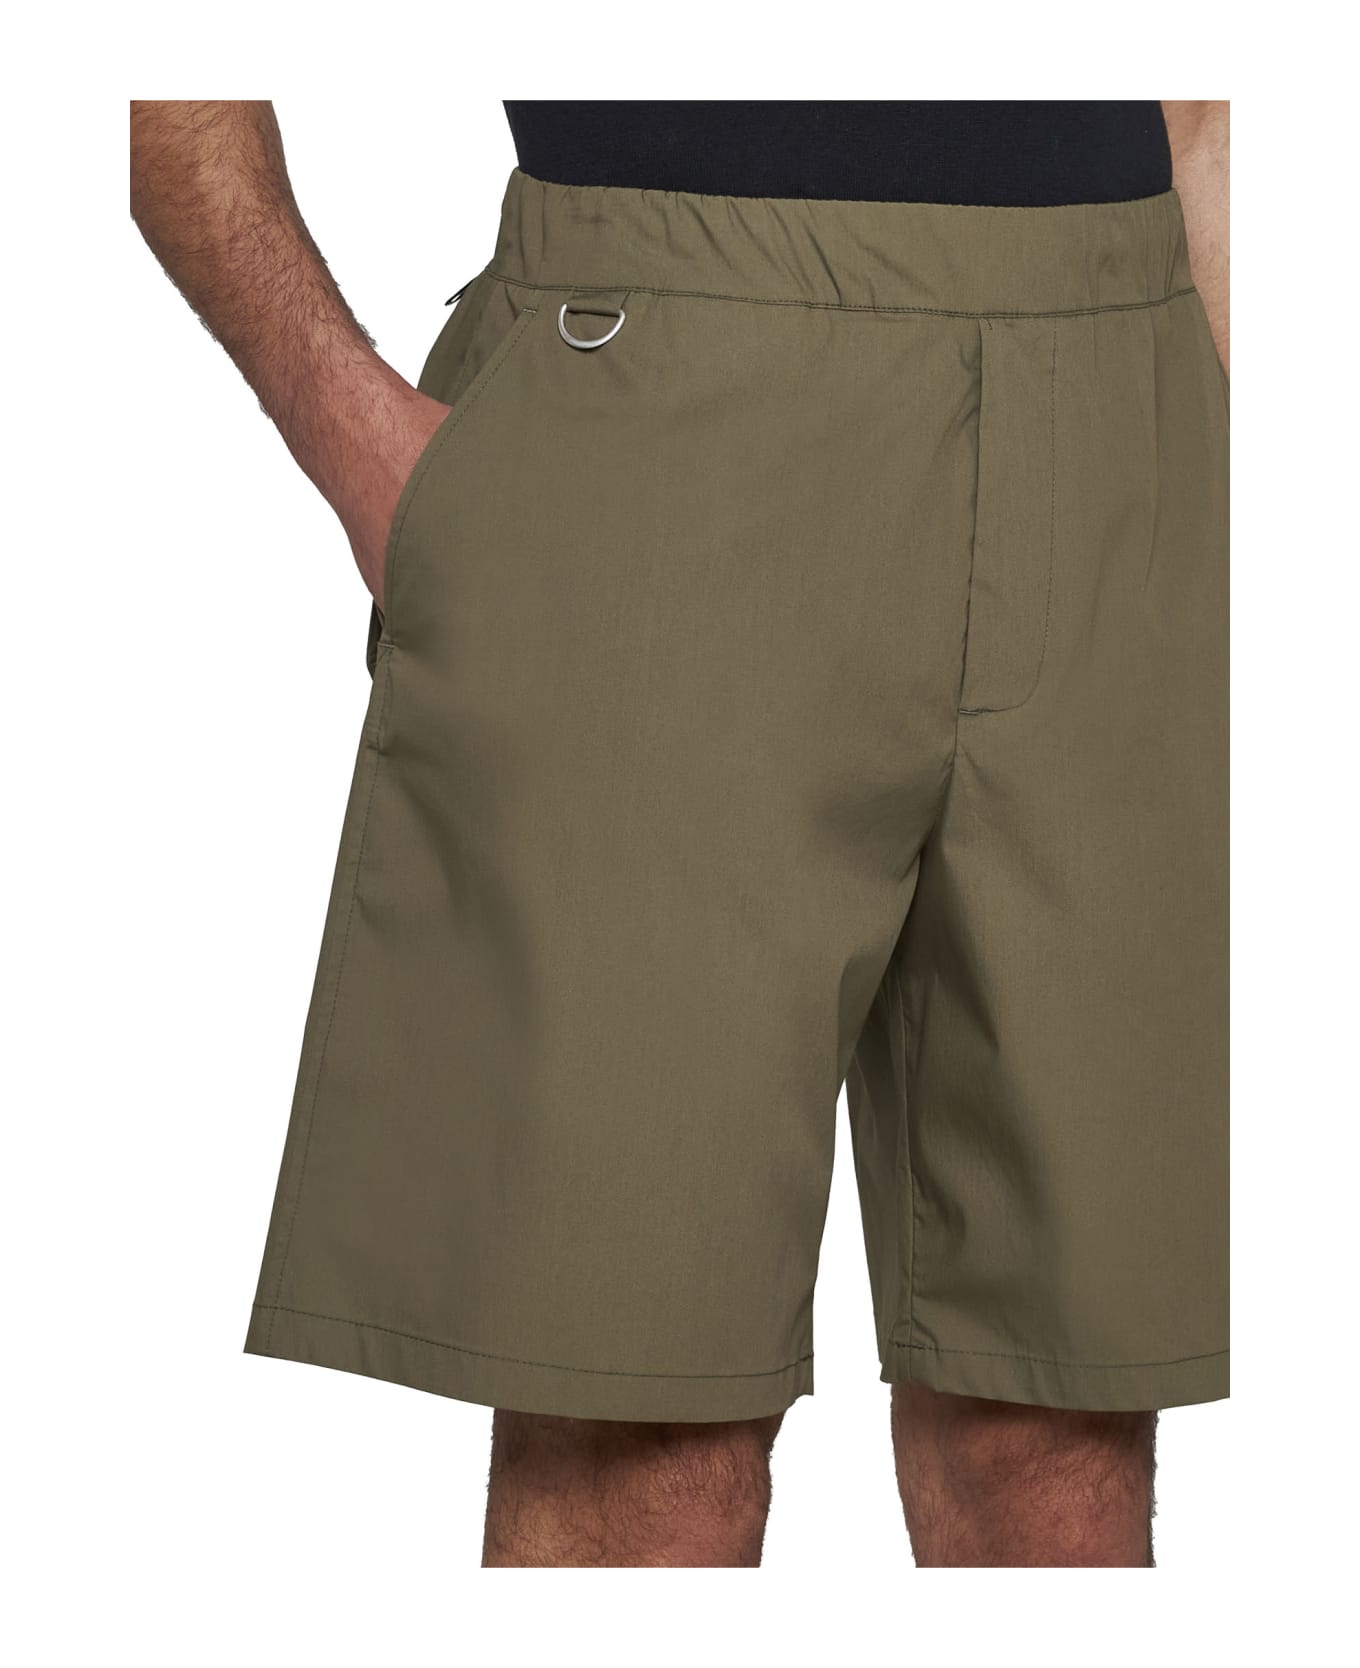 Low Brand Shorts